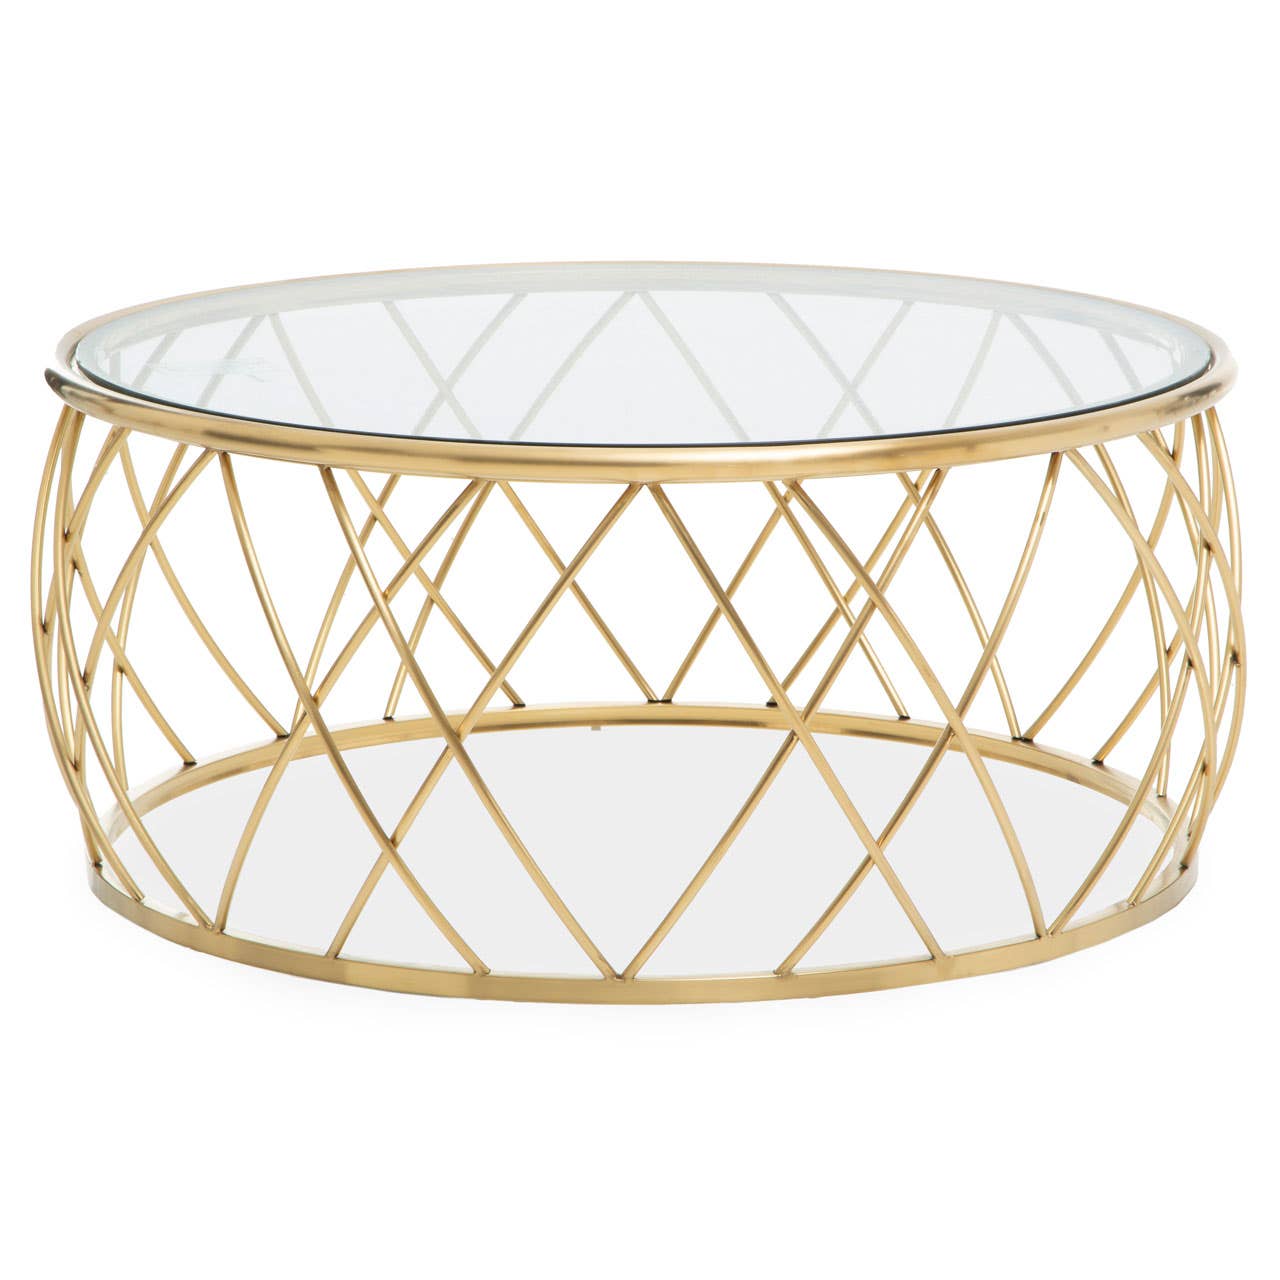 Ackley Clear Glass And Gold Frame Round Coffee Table.